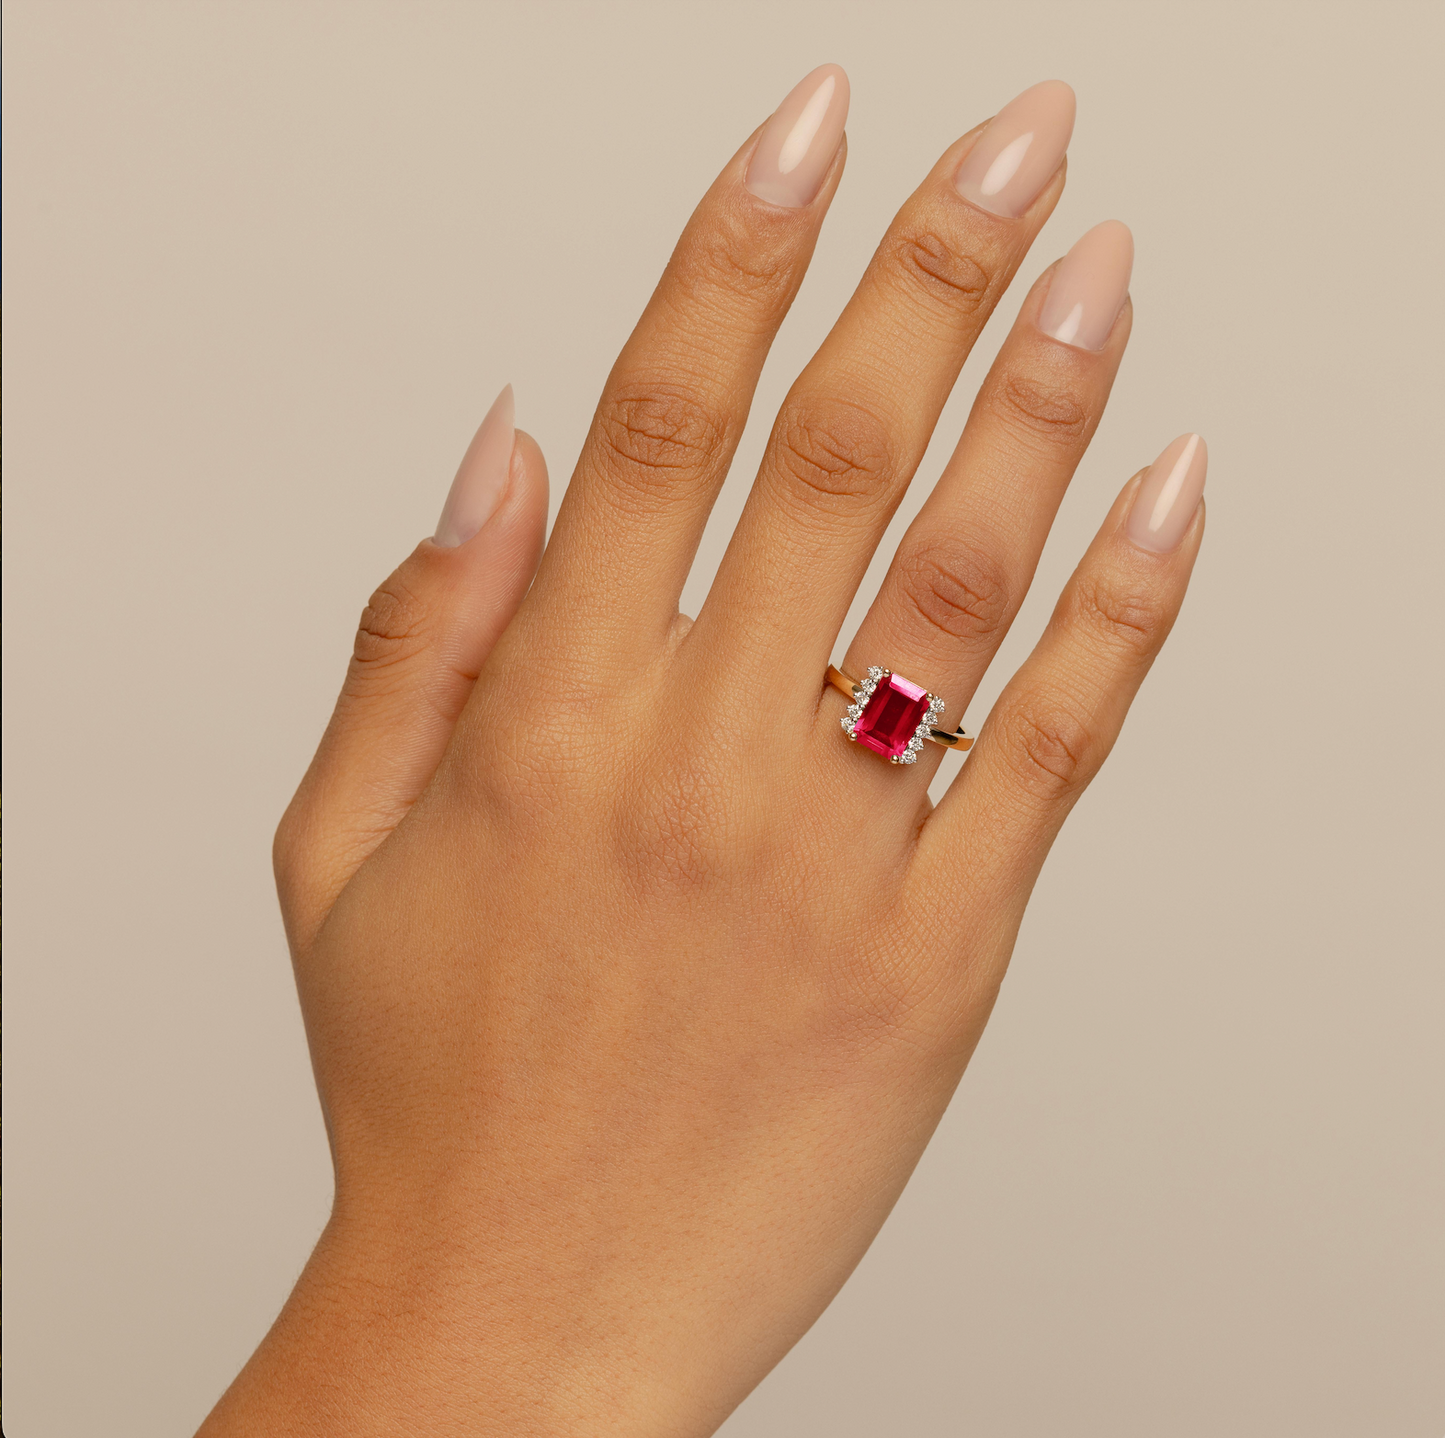 Emerald-cut Ruby Engagement Ring On Body